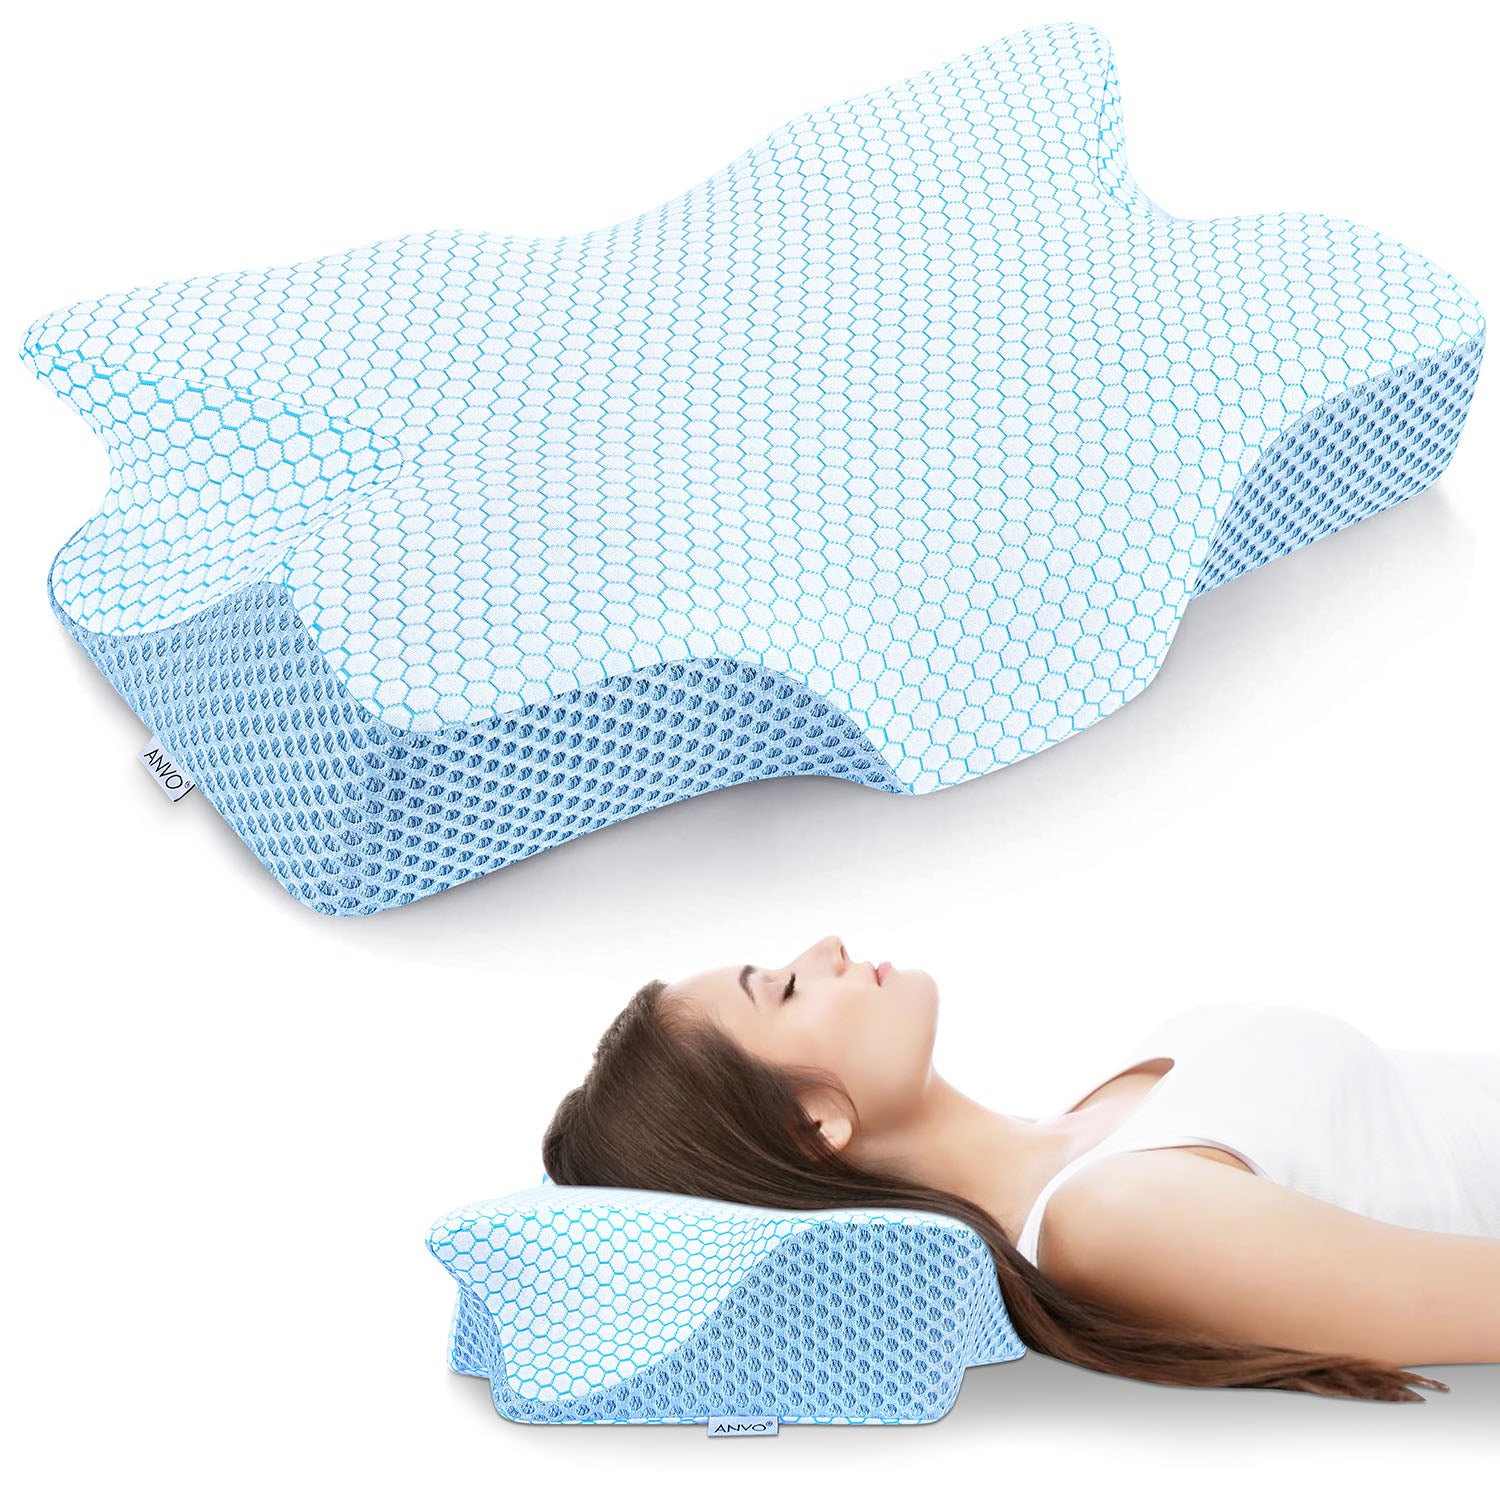 Neck Pillow Memory Foam Pillows - Ergonomic Pillow for Neck Shoulder Pain Relief Cooling Gel Pillow Bed Pillow for Sleeping Orthopedic Cervical